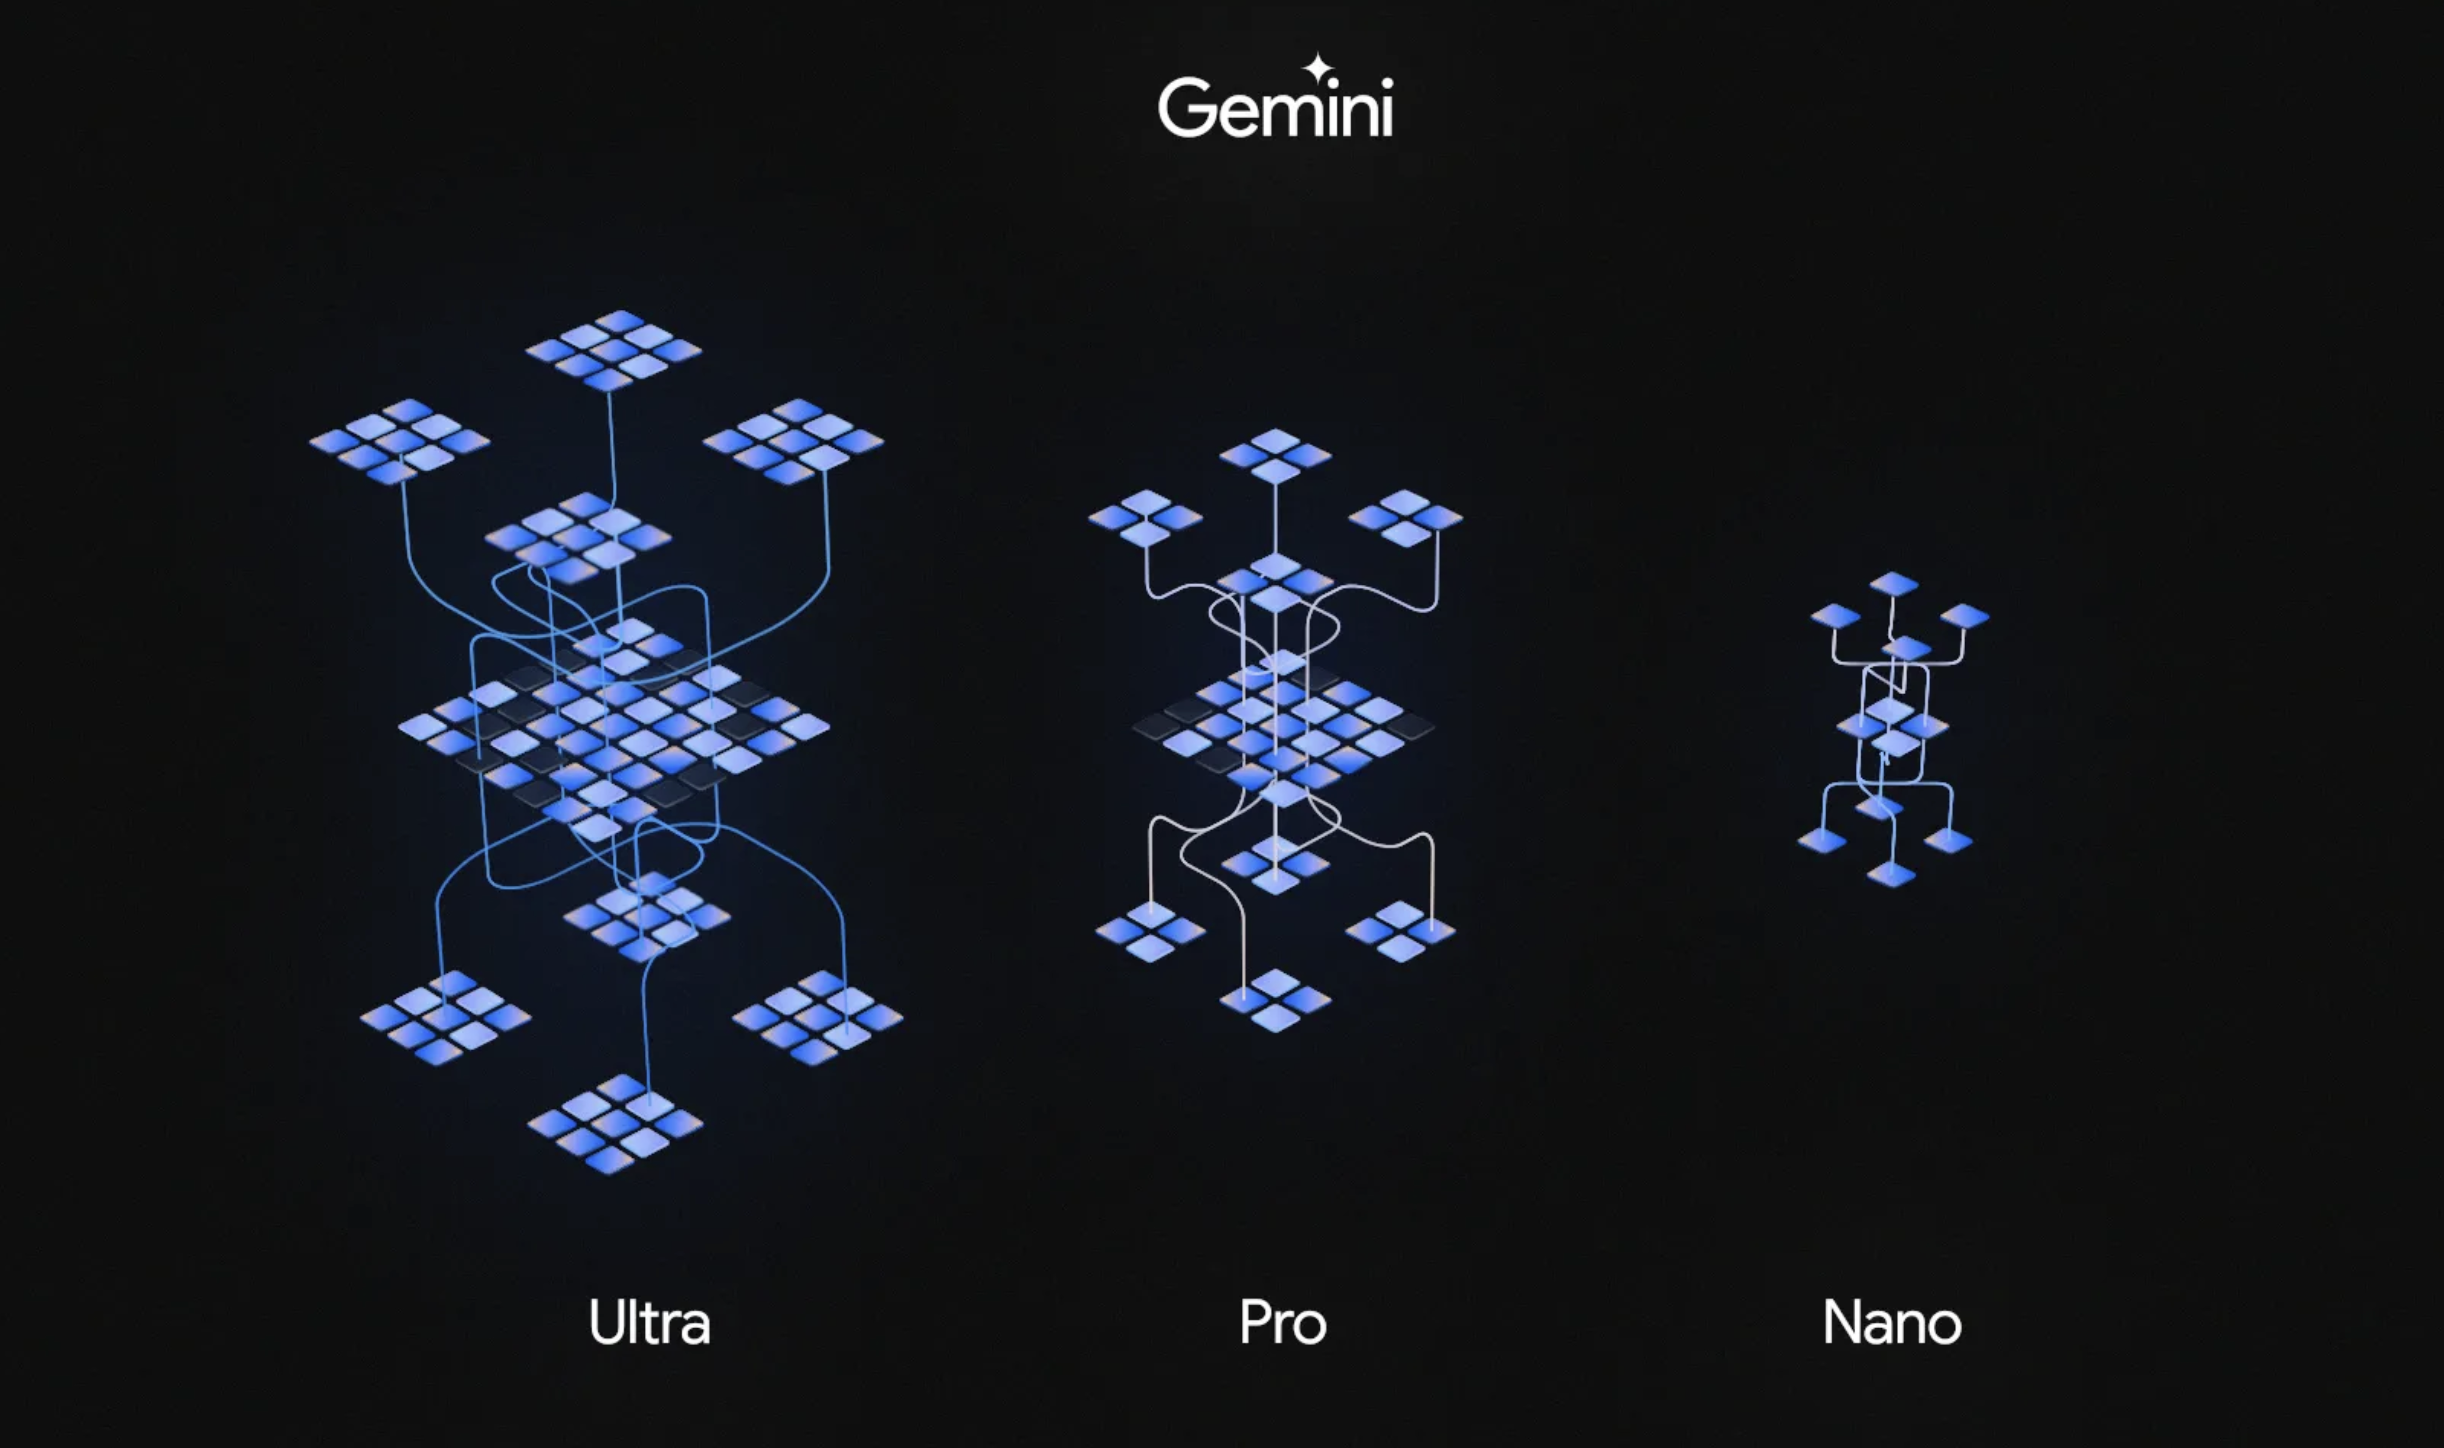 Google launches Gemini, an AI model to rival GPT-4